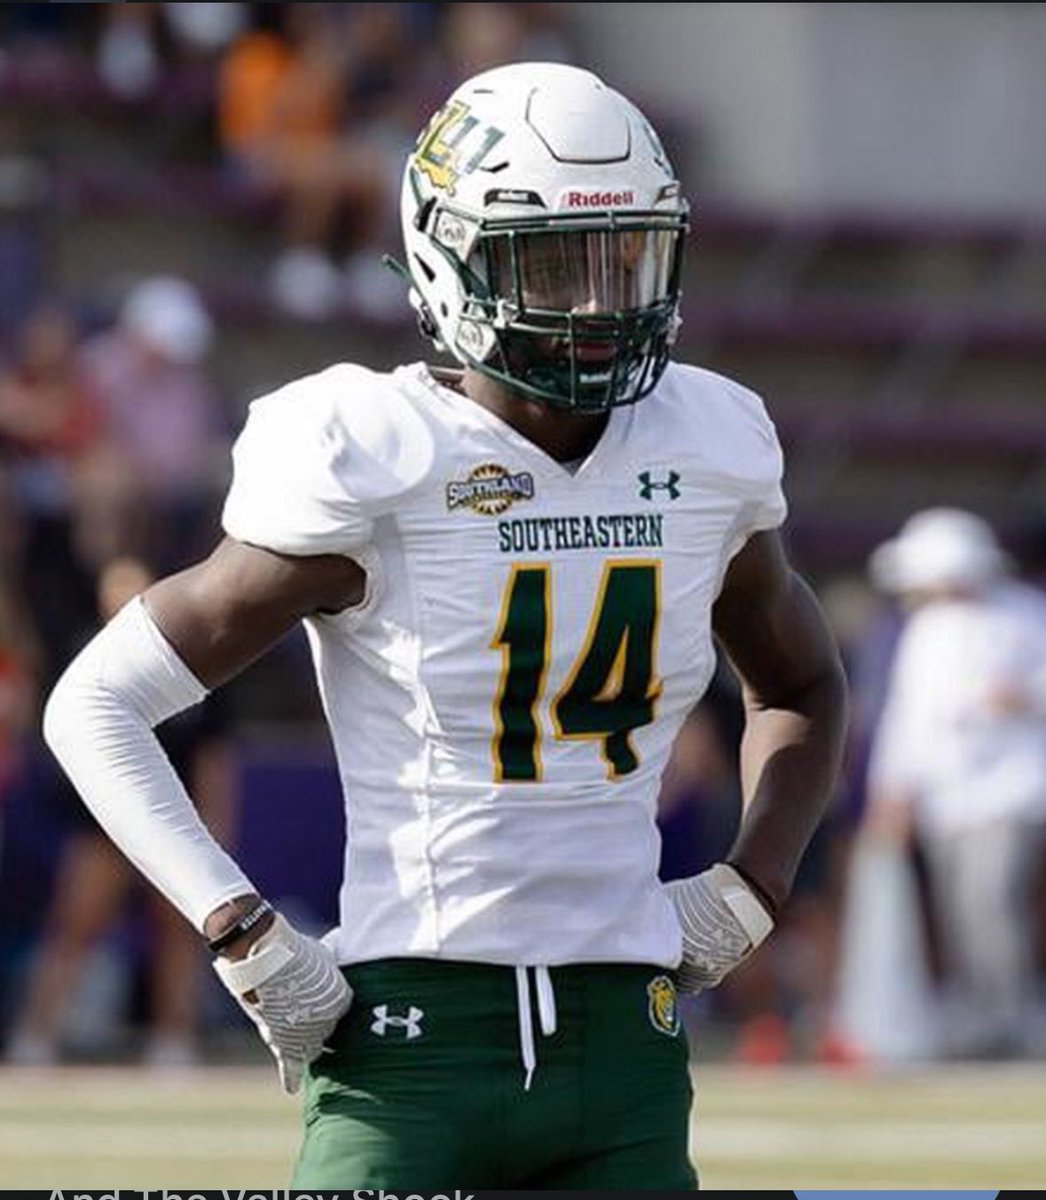 extremely blessed to receive an offer from southeastern louisiana university!🙏🏽💚💛 @CoachSlaughter2 @JordanArcement @KenAnioJr @MarshallRivals @samspiegs @JimmyDetail @_Taymartin1 @RossJynx